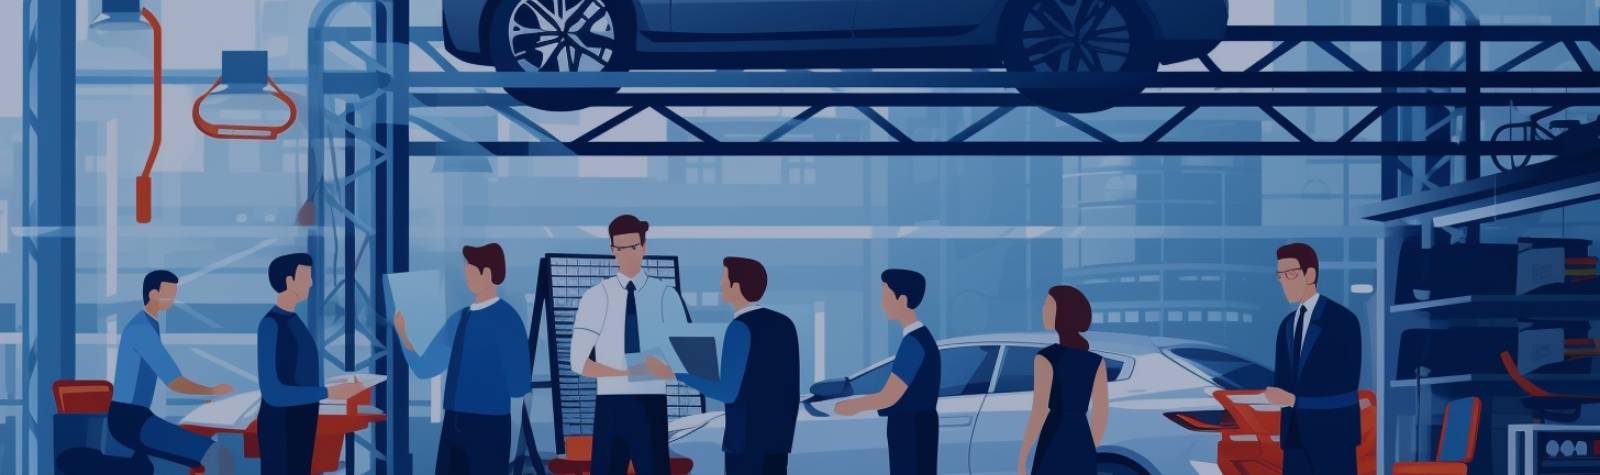 The Role of Collaboration in Automotive Logistics